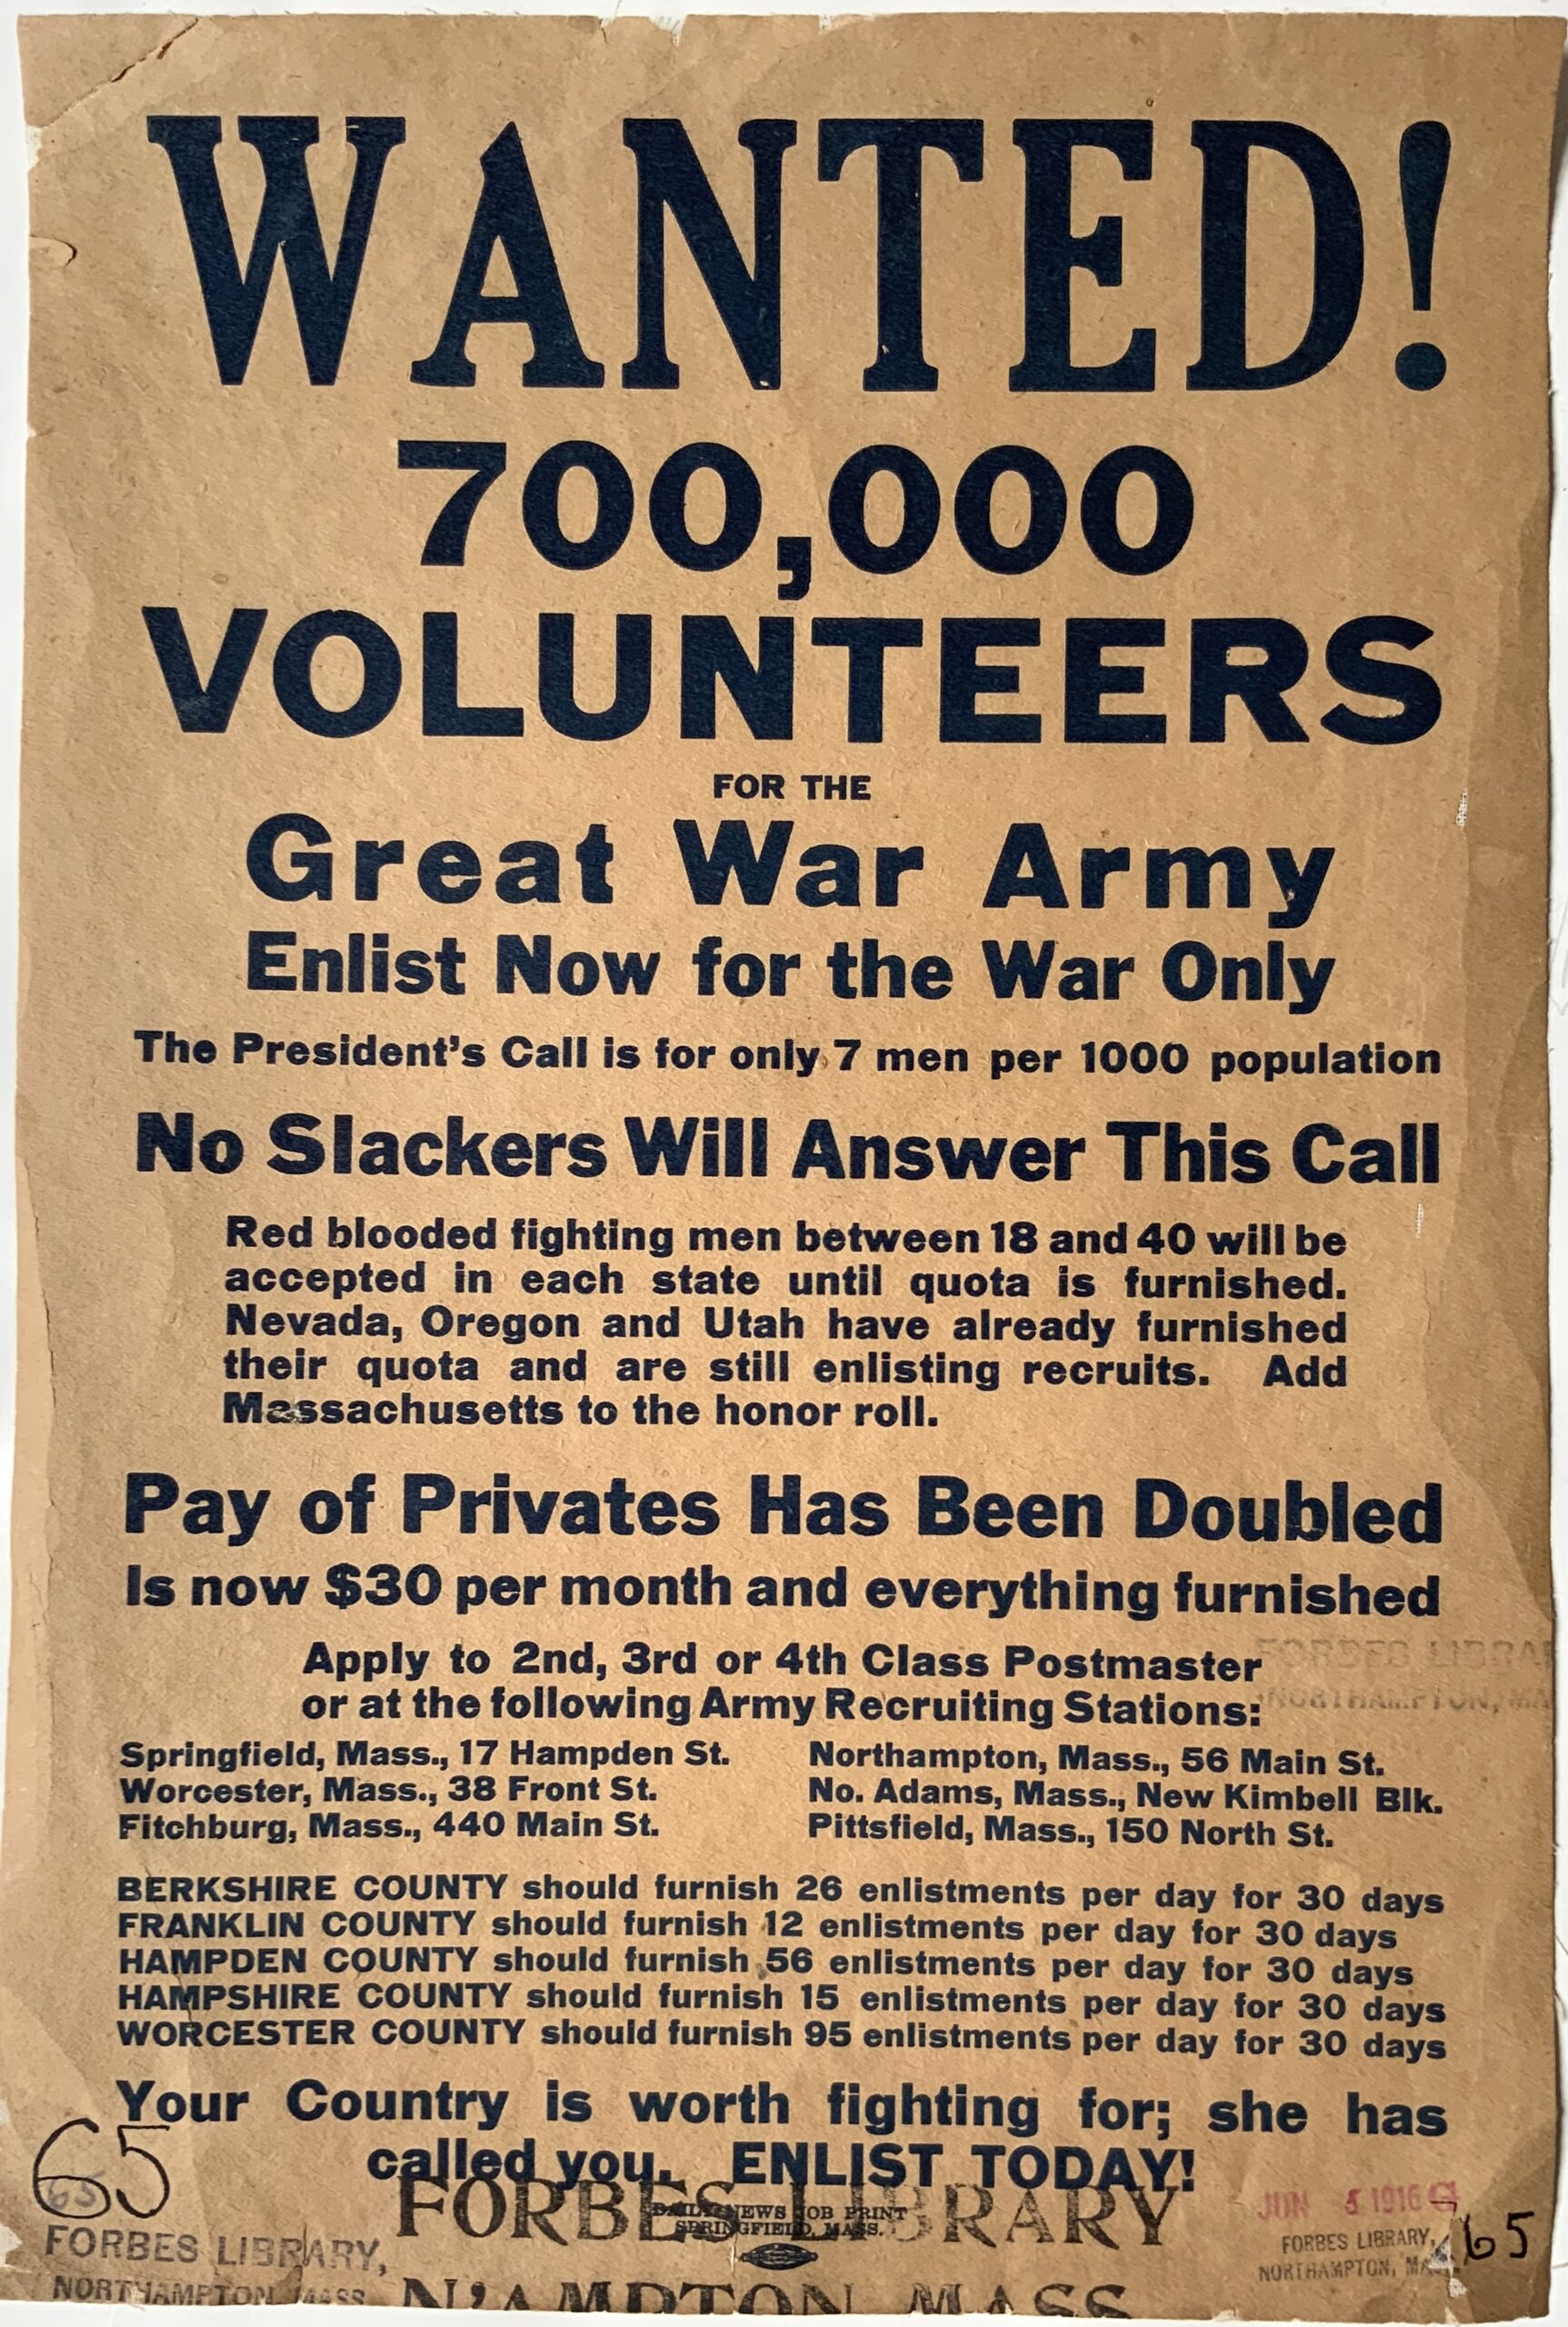 M396	WANTED! 700,000 VOLUNTEERS FOR THE GREAT WAR ARMY